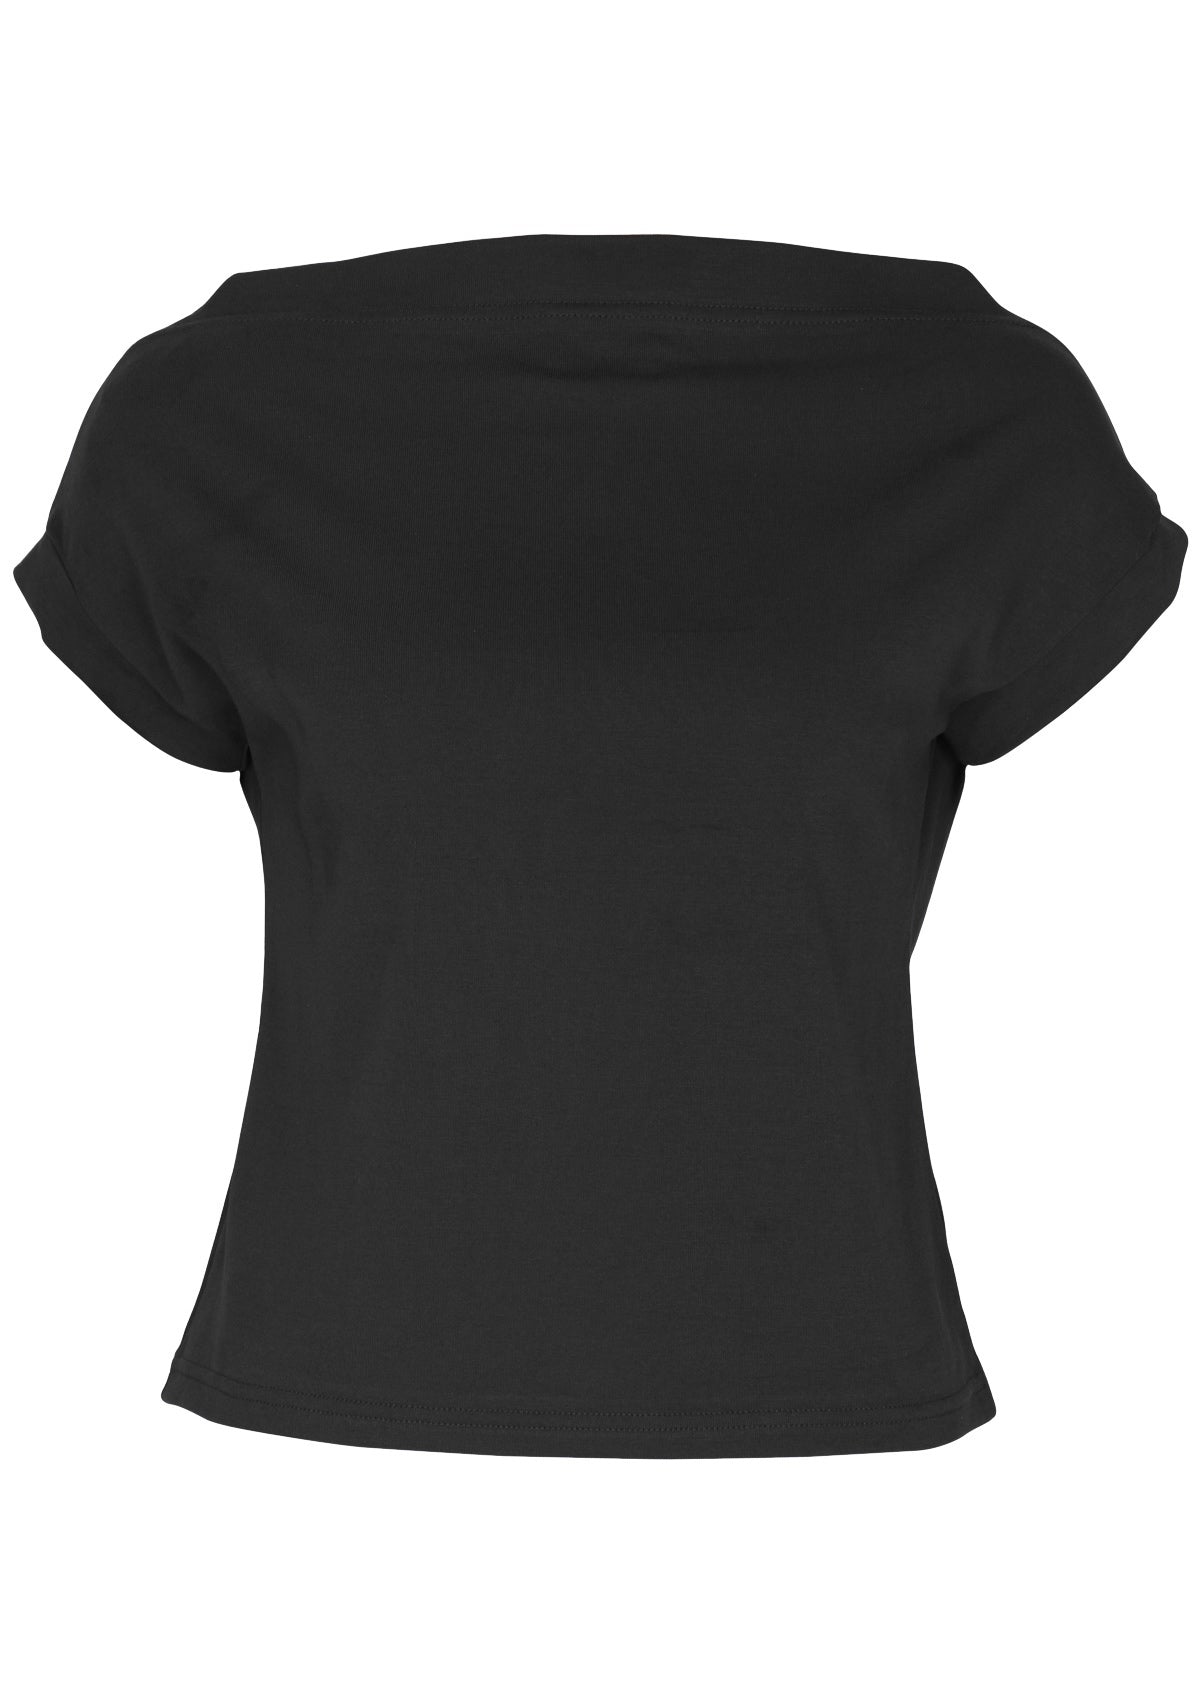 Front view of women's wide neck mod black stretch rayon boat neck top